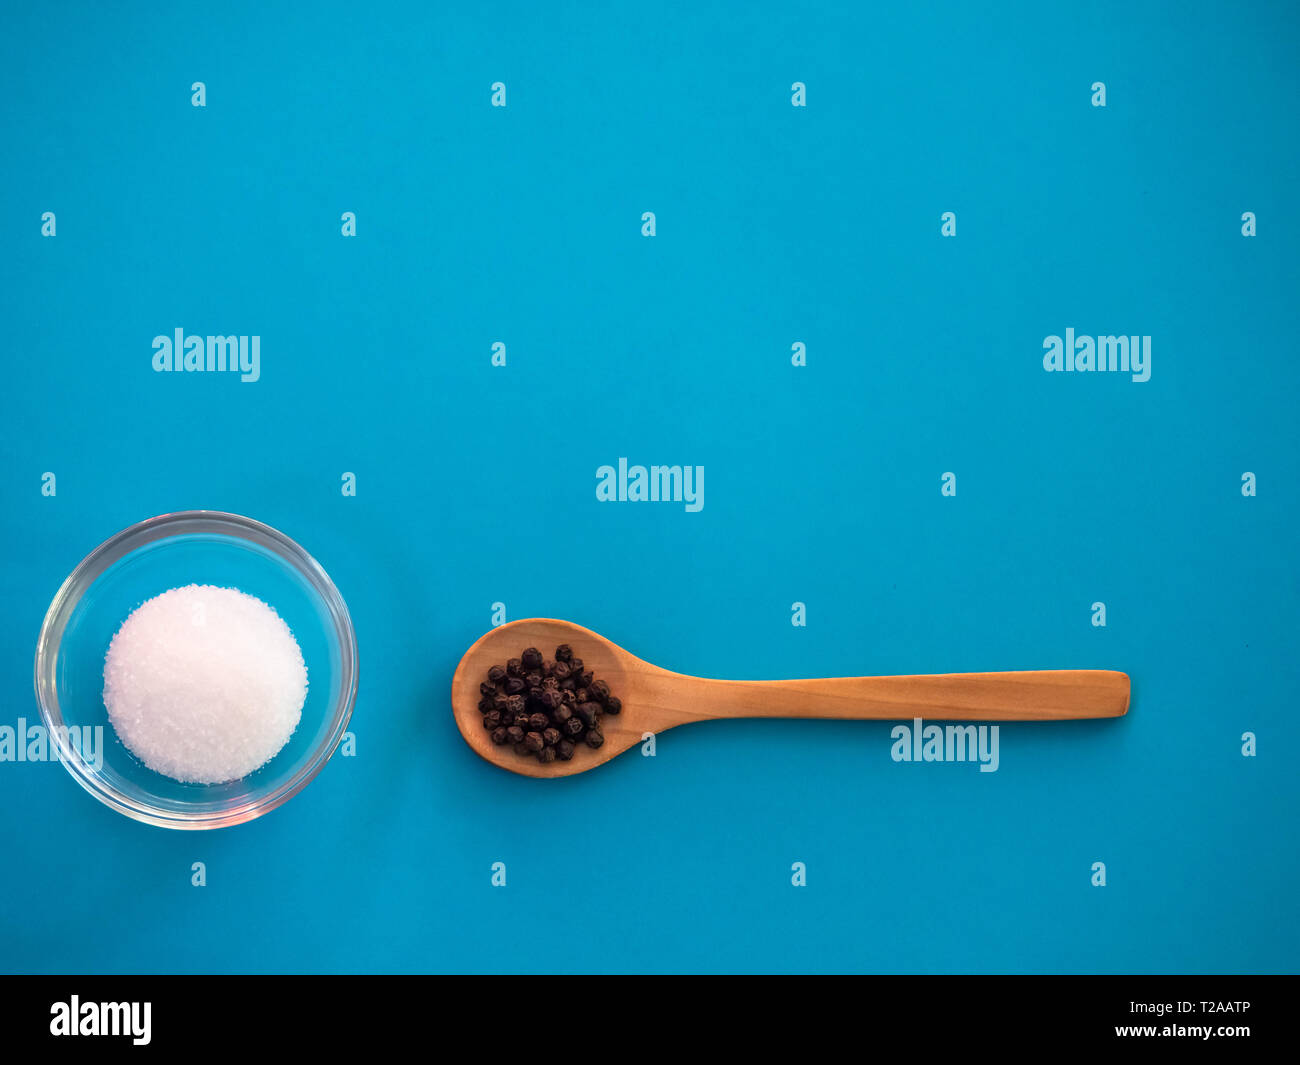 Crystal bowl with common marine salt and a wooden spoon with black peppercorns on a blue background Stock Photo